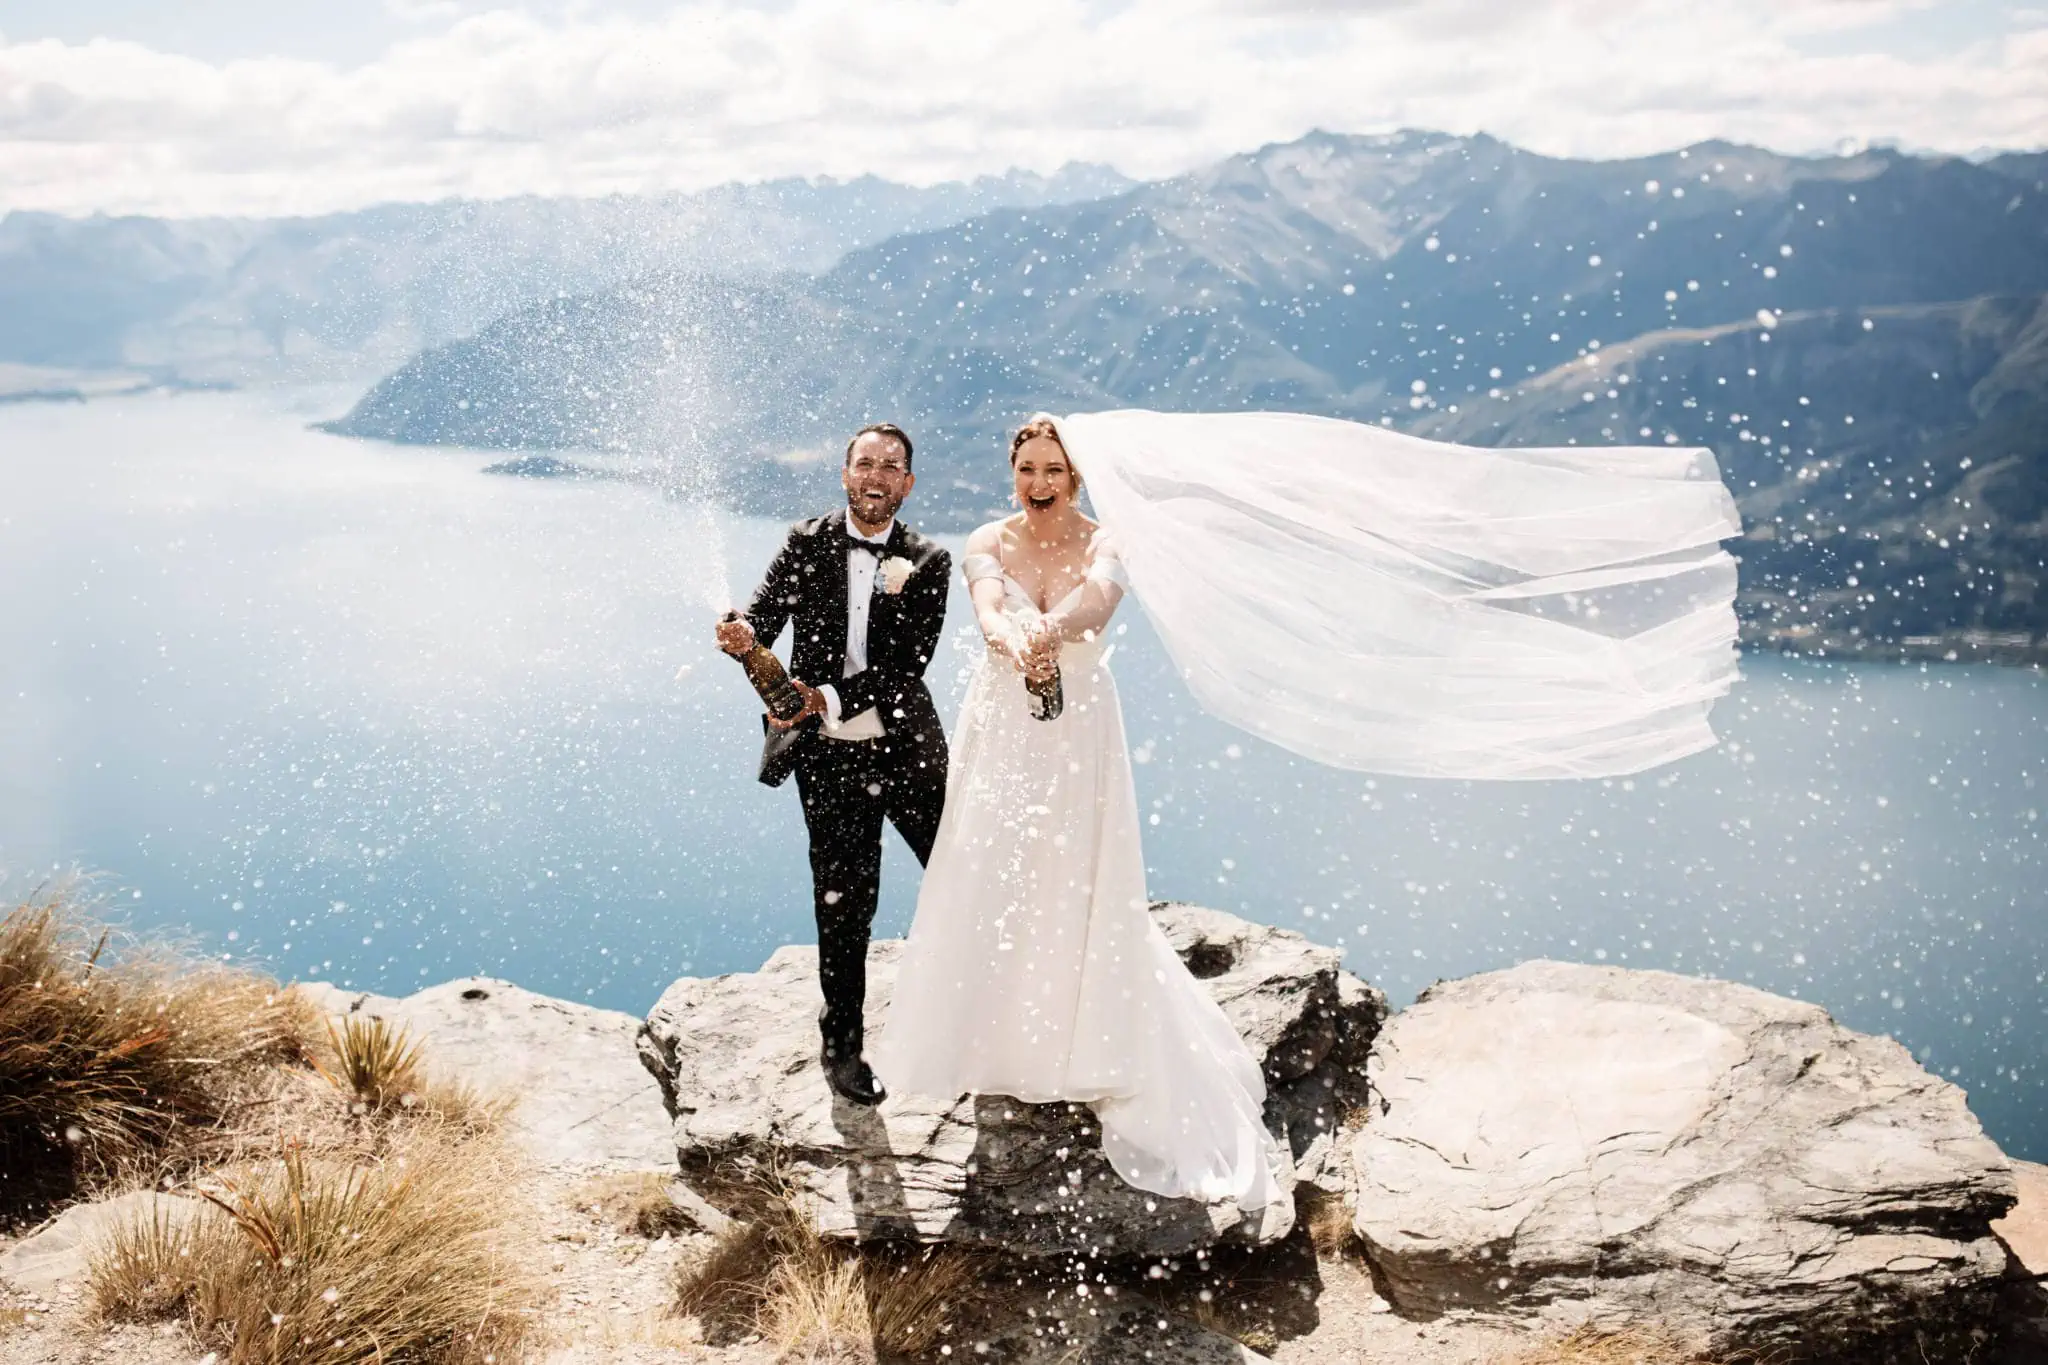 Sapphire and JJ's Queenstown Heli Elopement Wedding on top of a mountain overlooking Lake Wanaka.